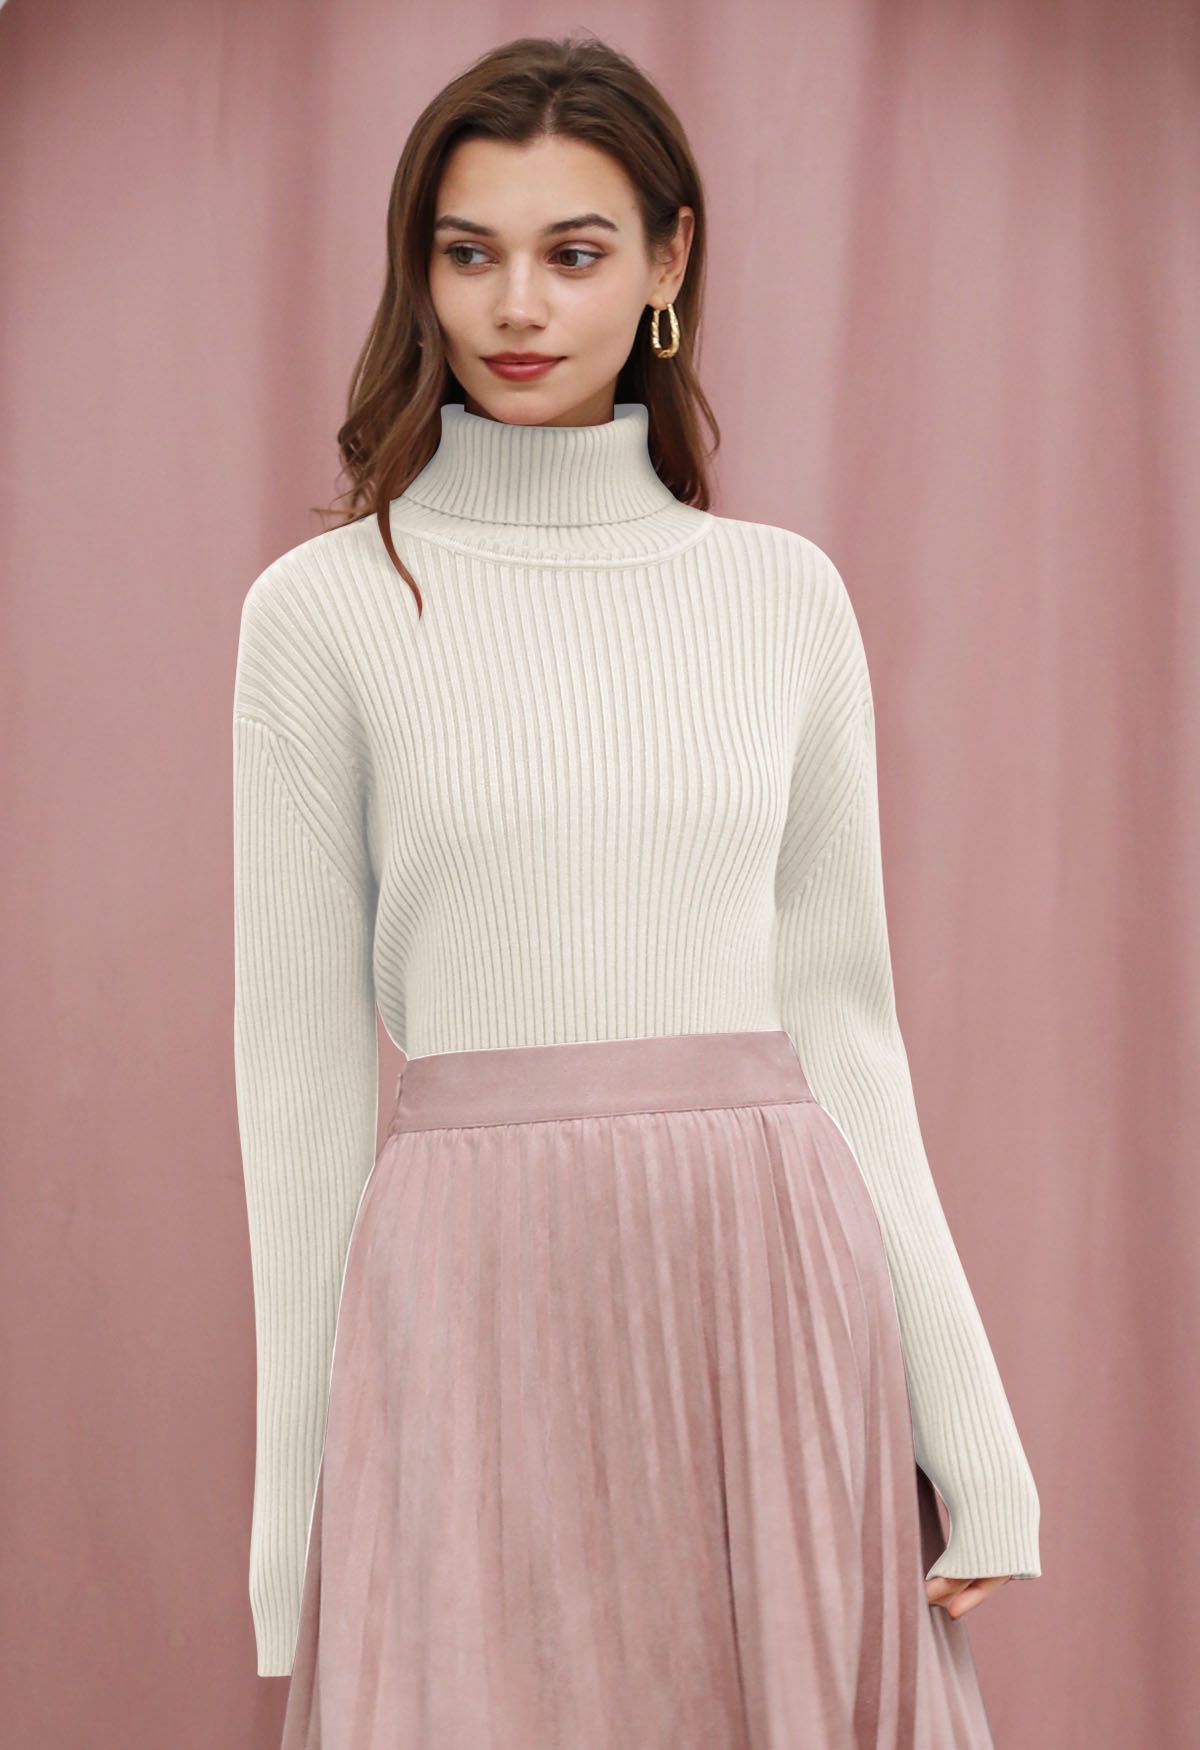 Versatile Turtleneck Ribbed Knit Sweater in Ivory